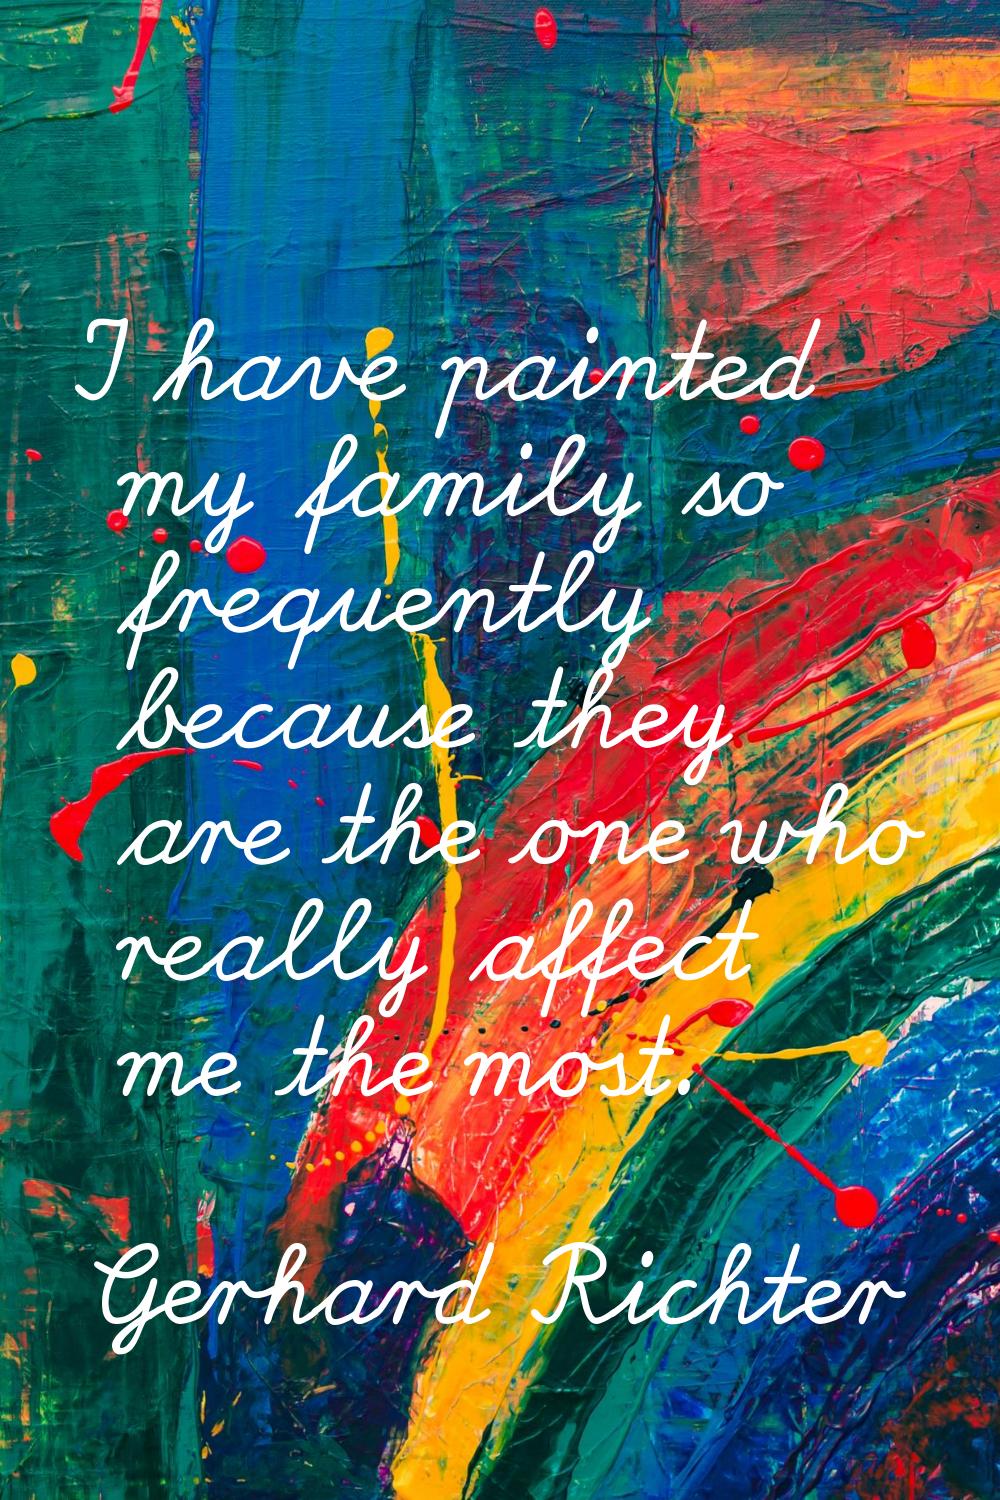 I have painted my family so frequently because they are the one who really affect me the most.